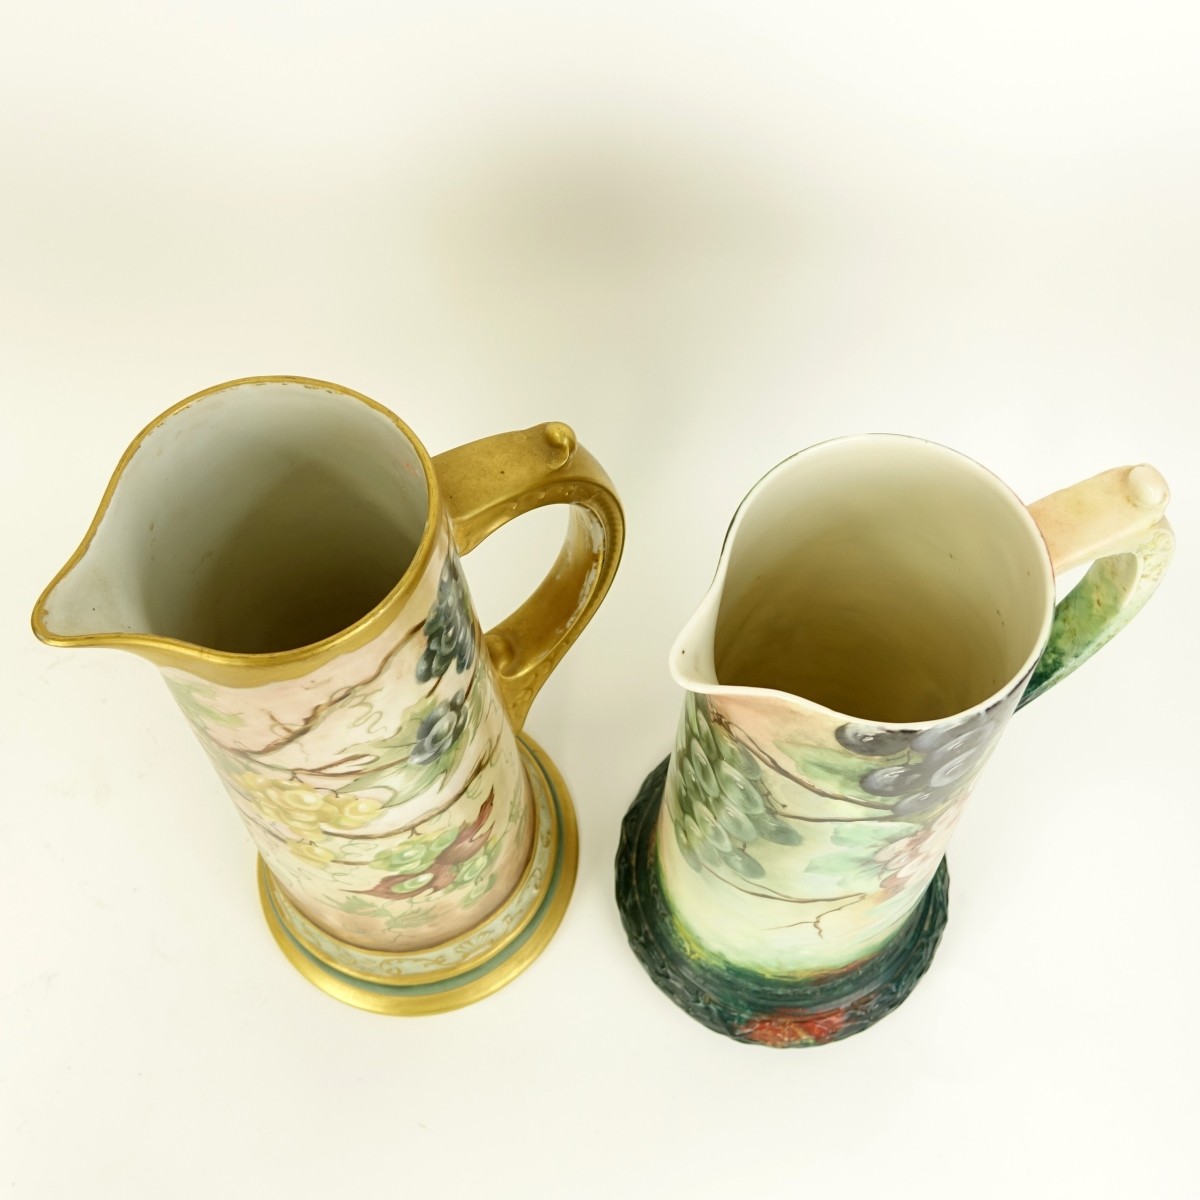 Two Antique Signed Pitchers